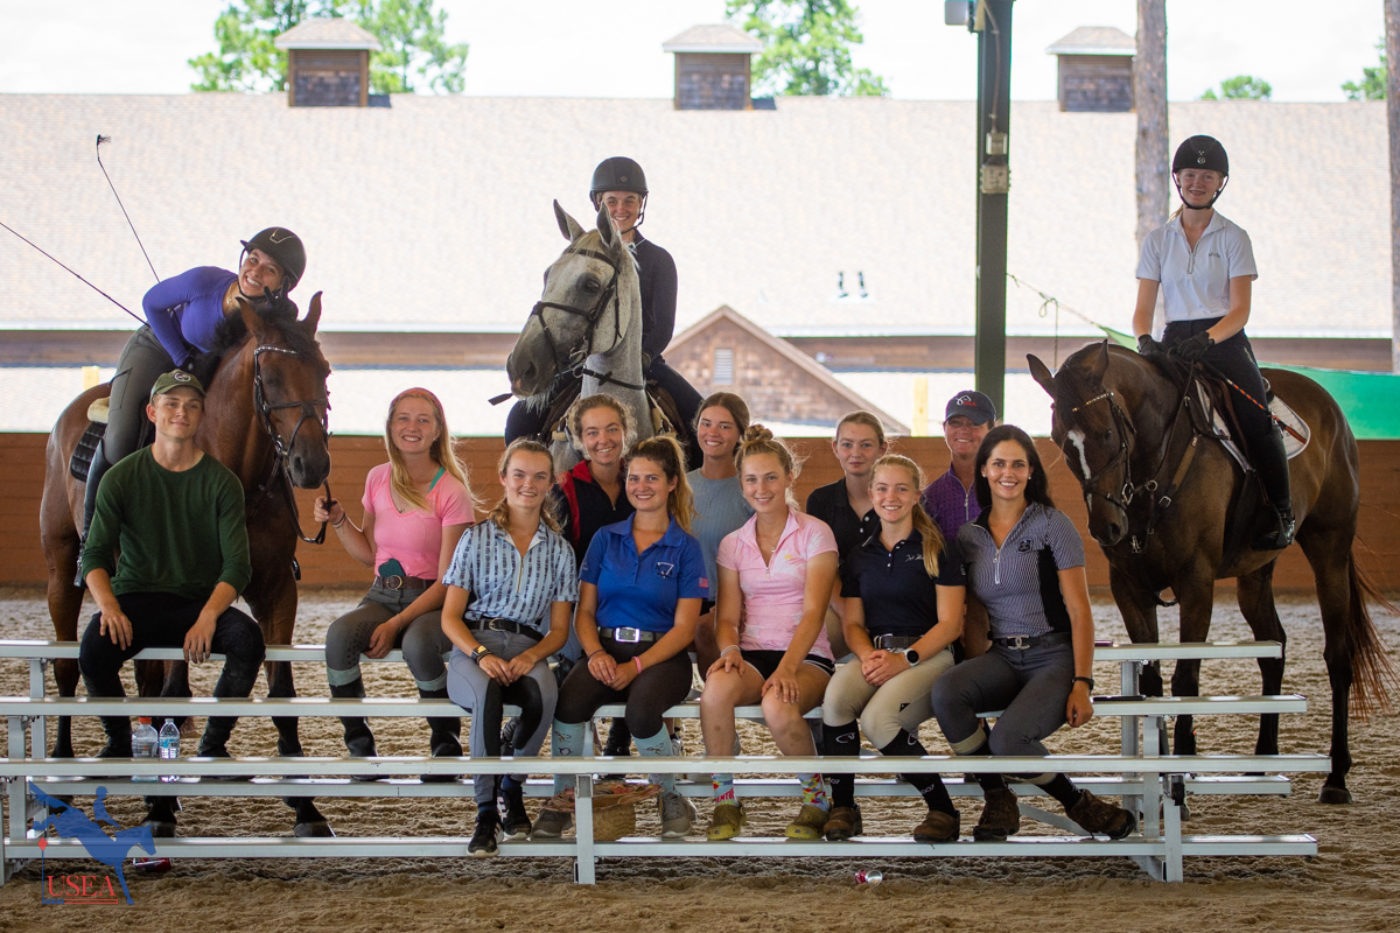 The group of participants from the EA21 Stable View Regional Clinic. USEA/ Shelby Allen photo